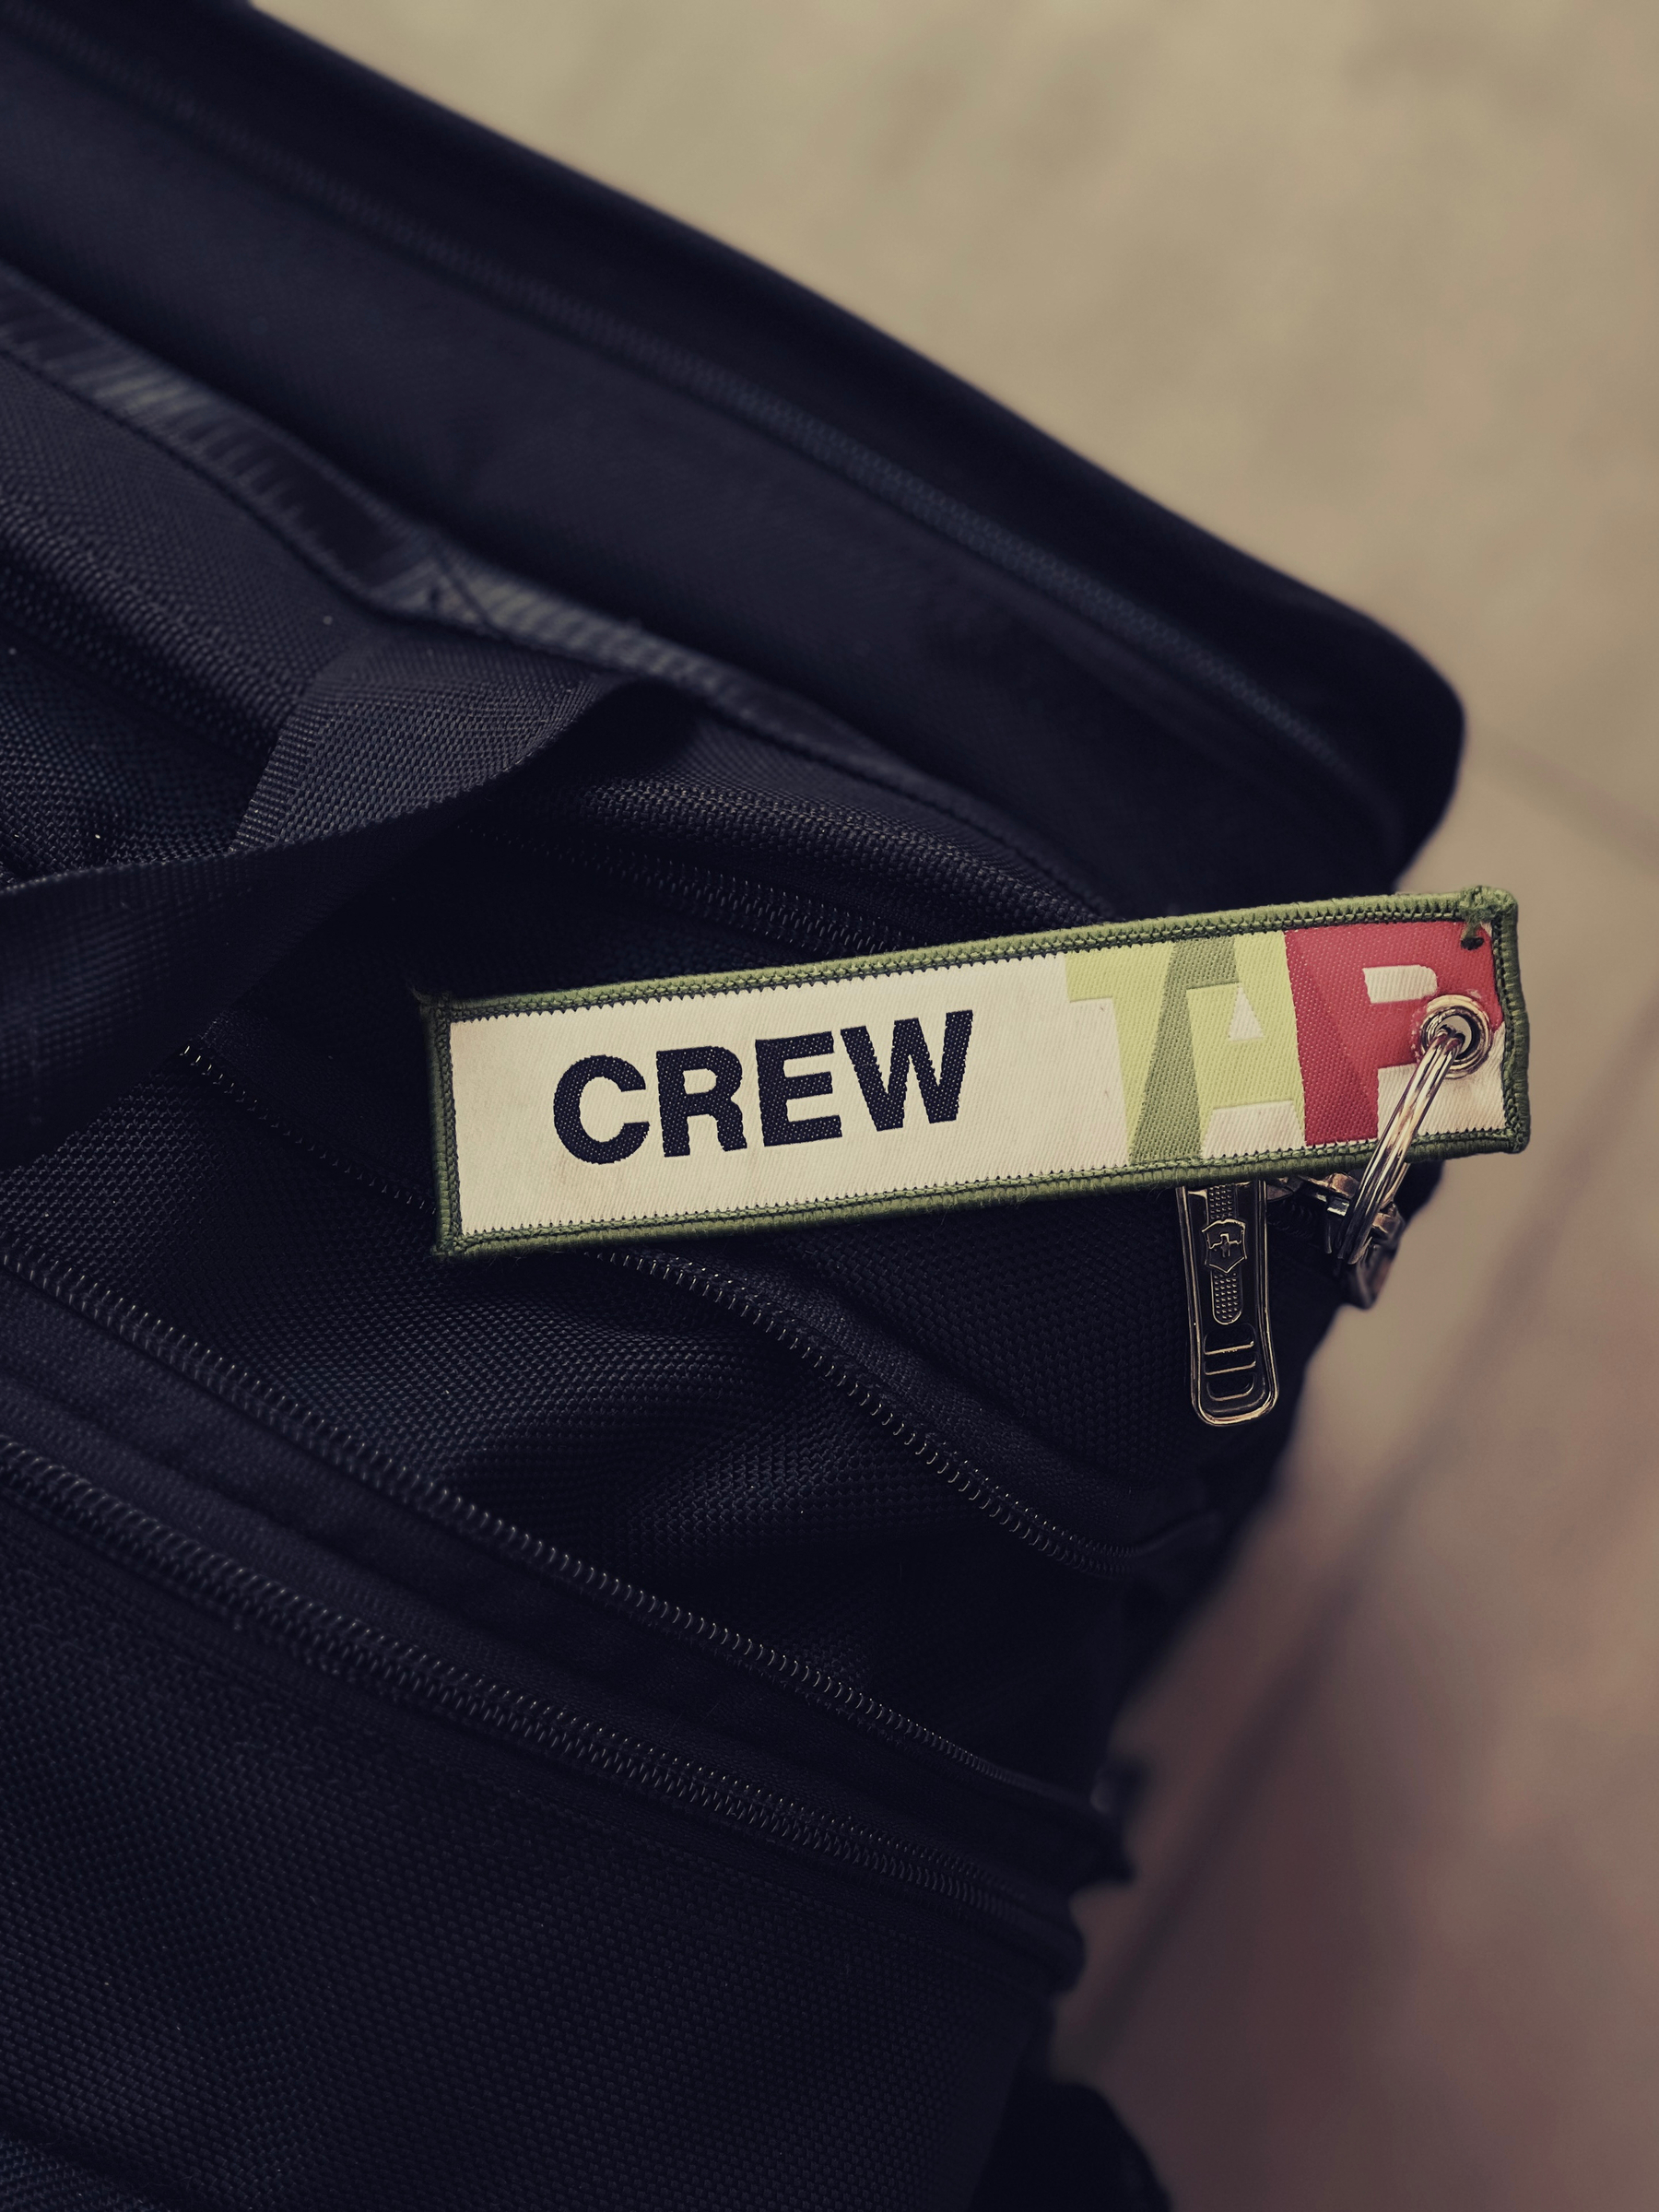 A bag with a “crew” tag for TAP. 